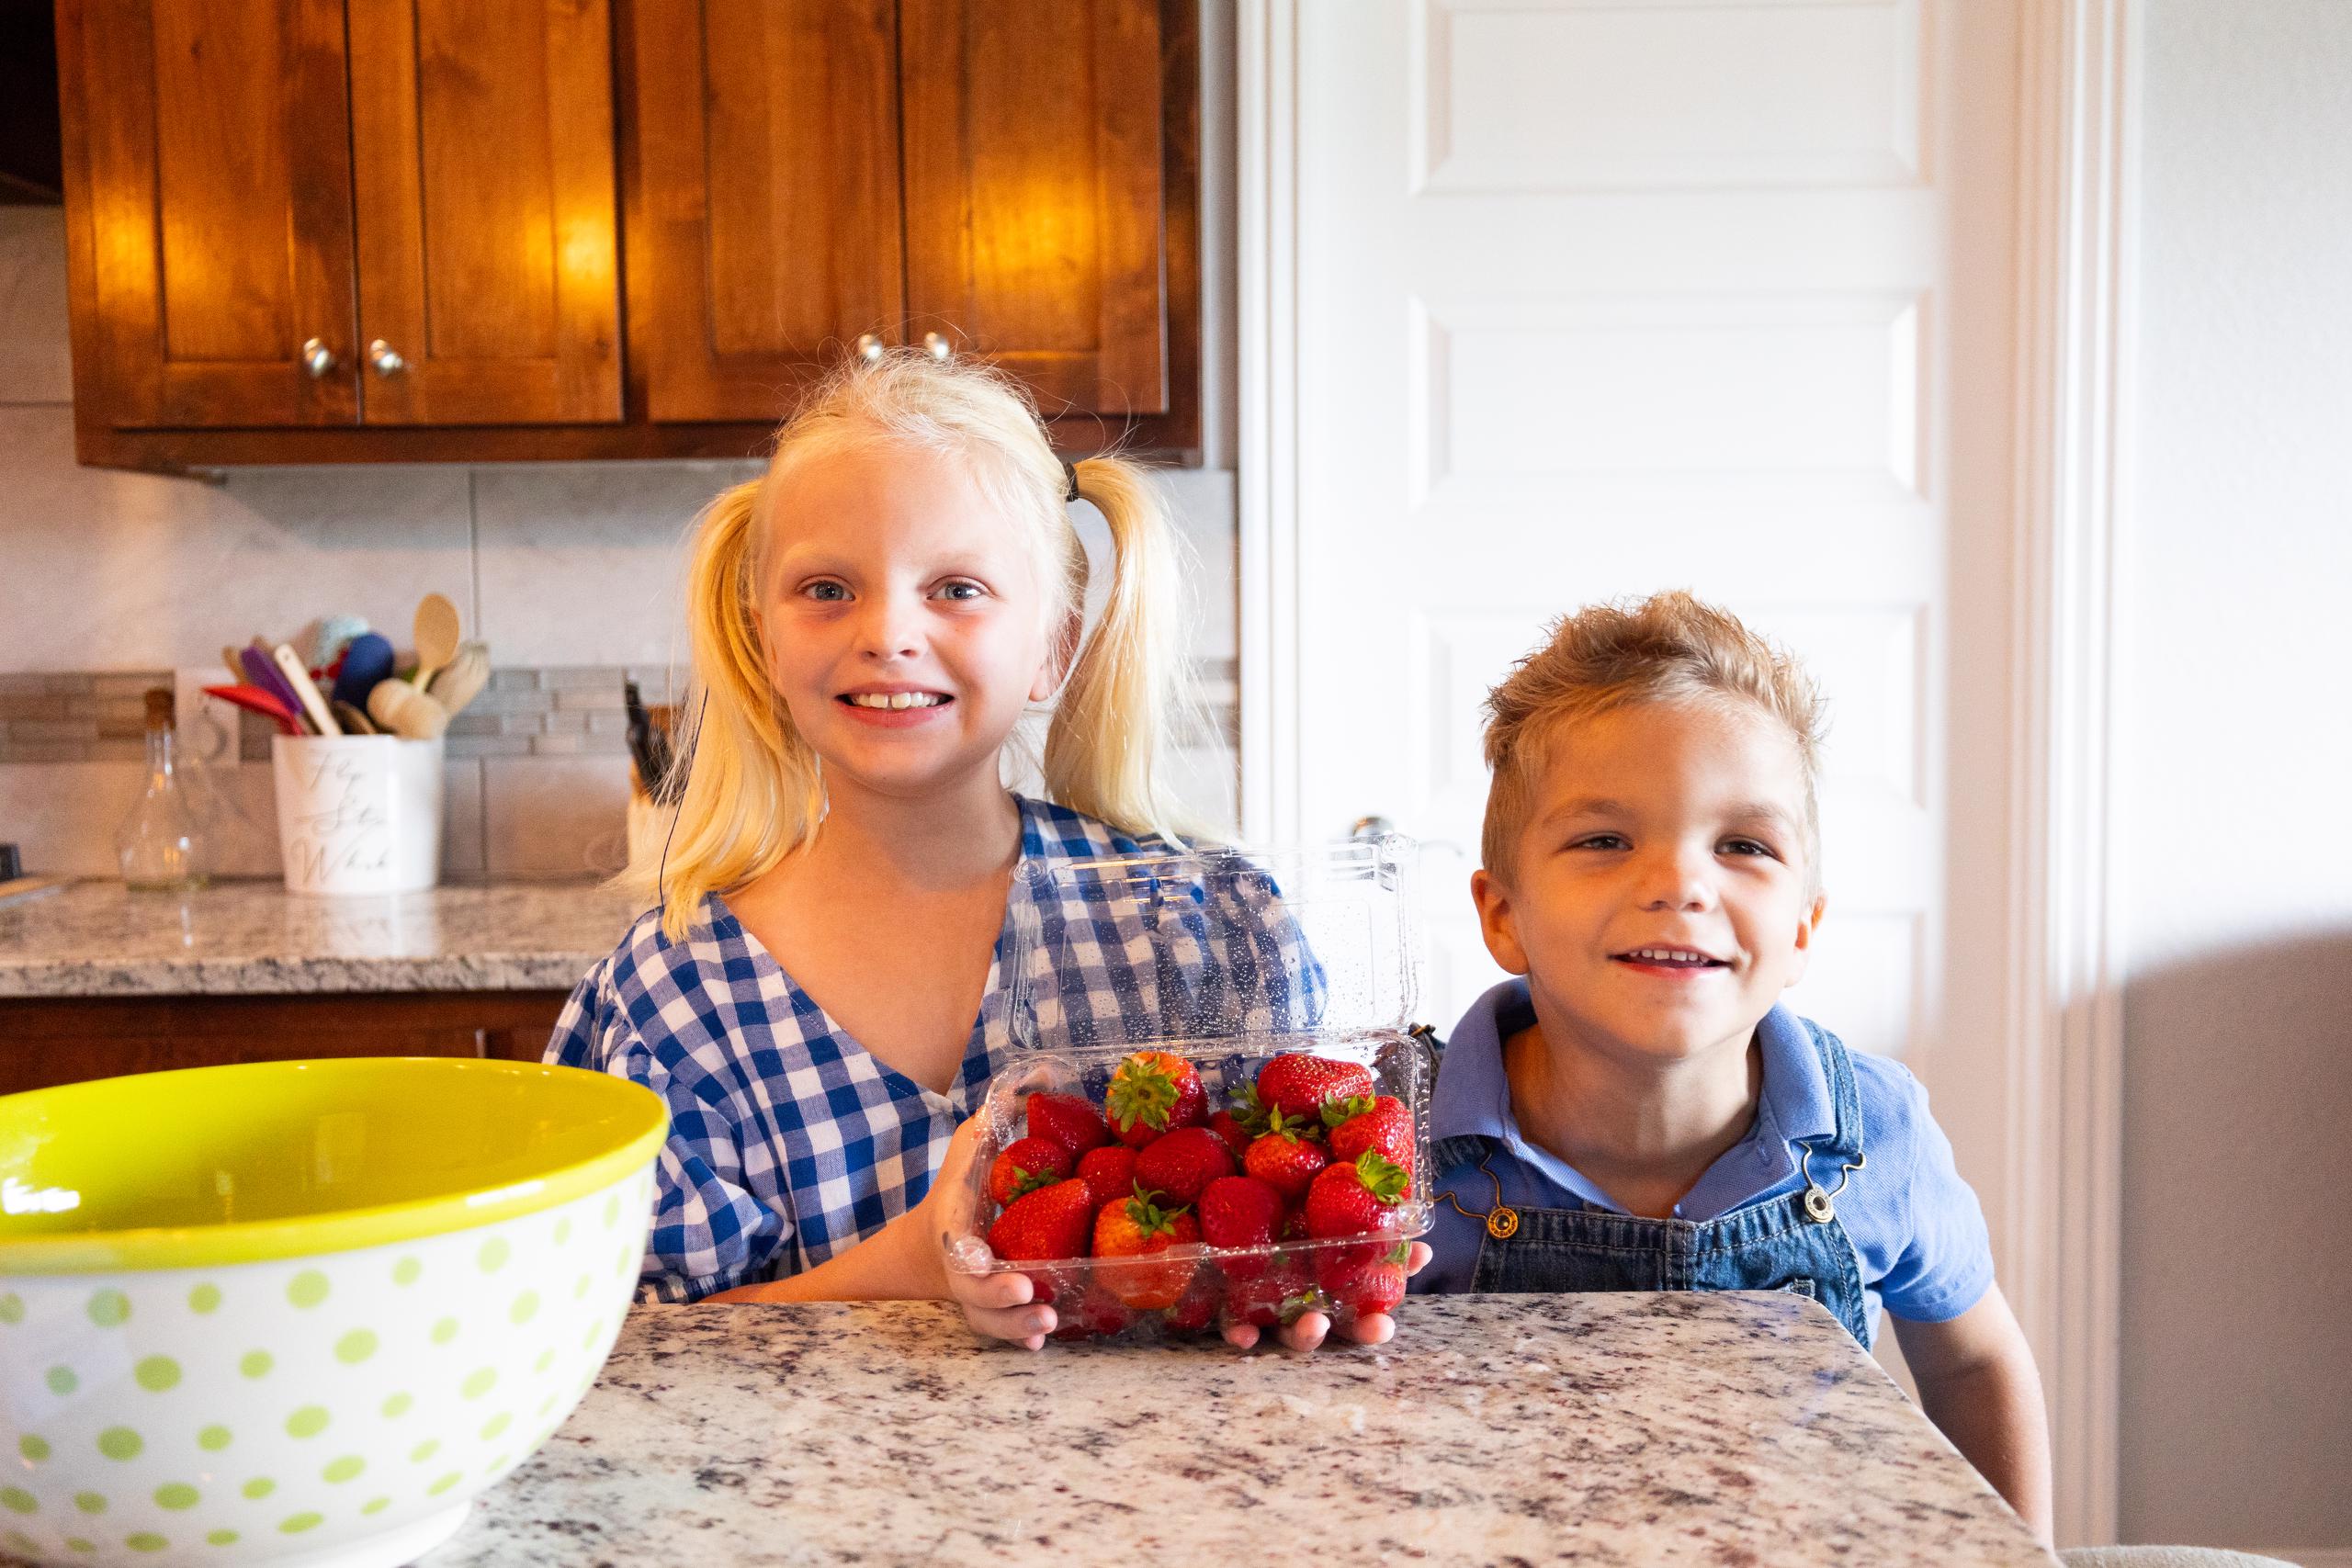 Farm Credit of Western Arkansas, Casey Ford, Strawberry Jam, Canning, Food preservation, Canning for kids, canning recipes for kids